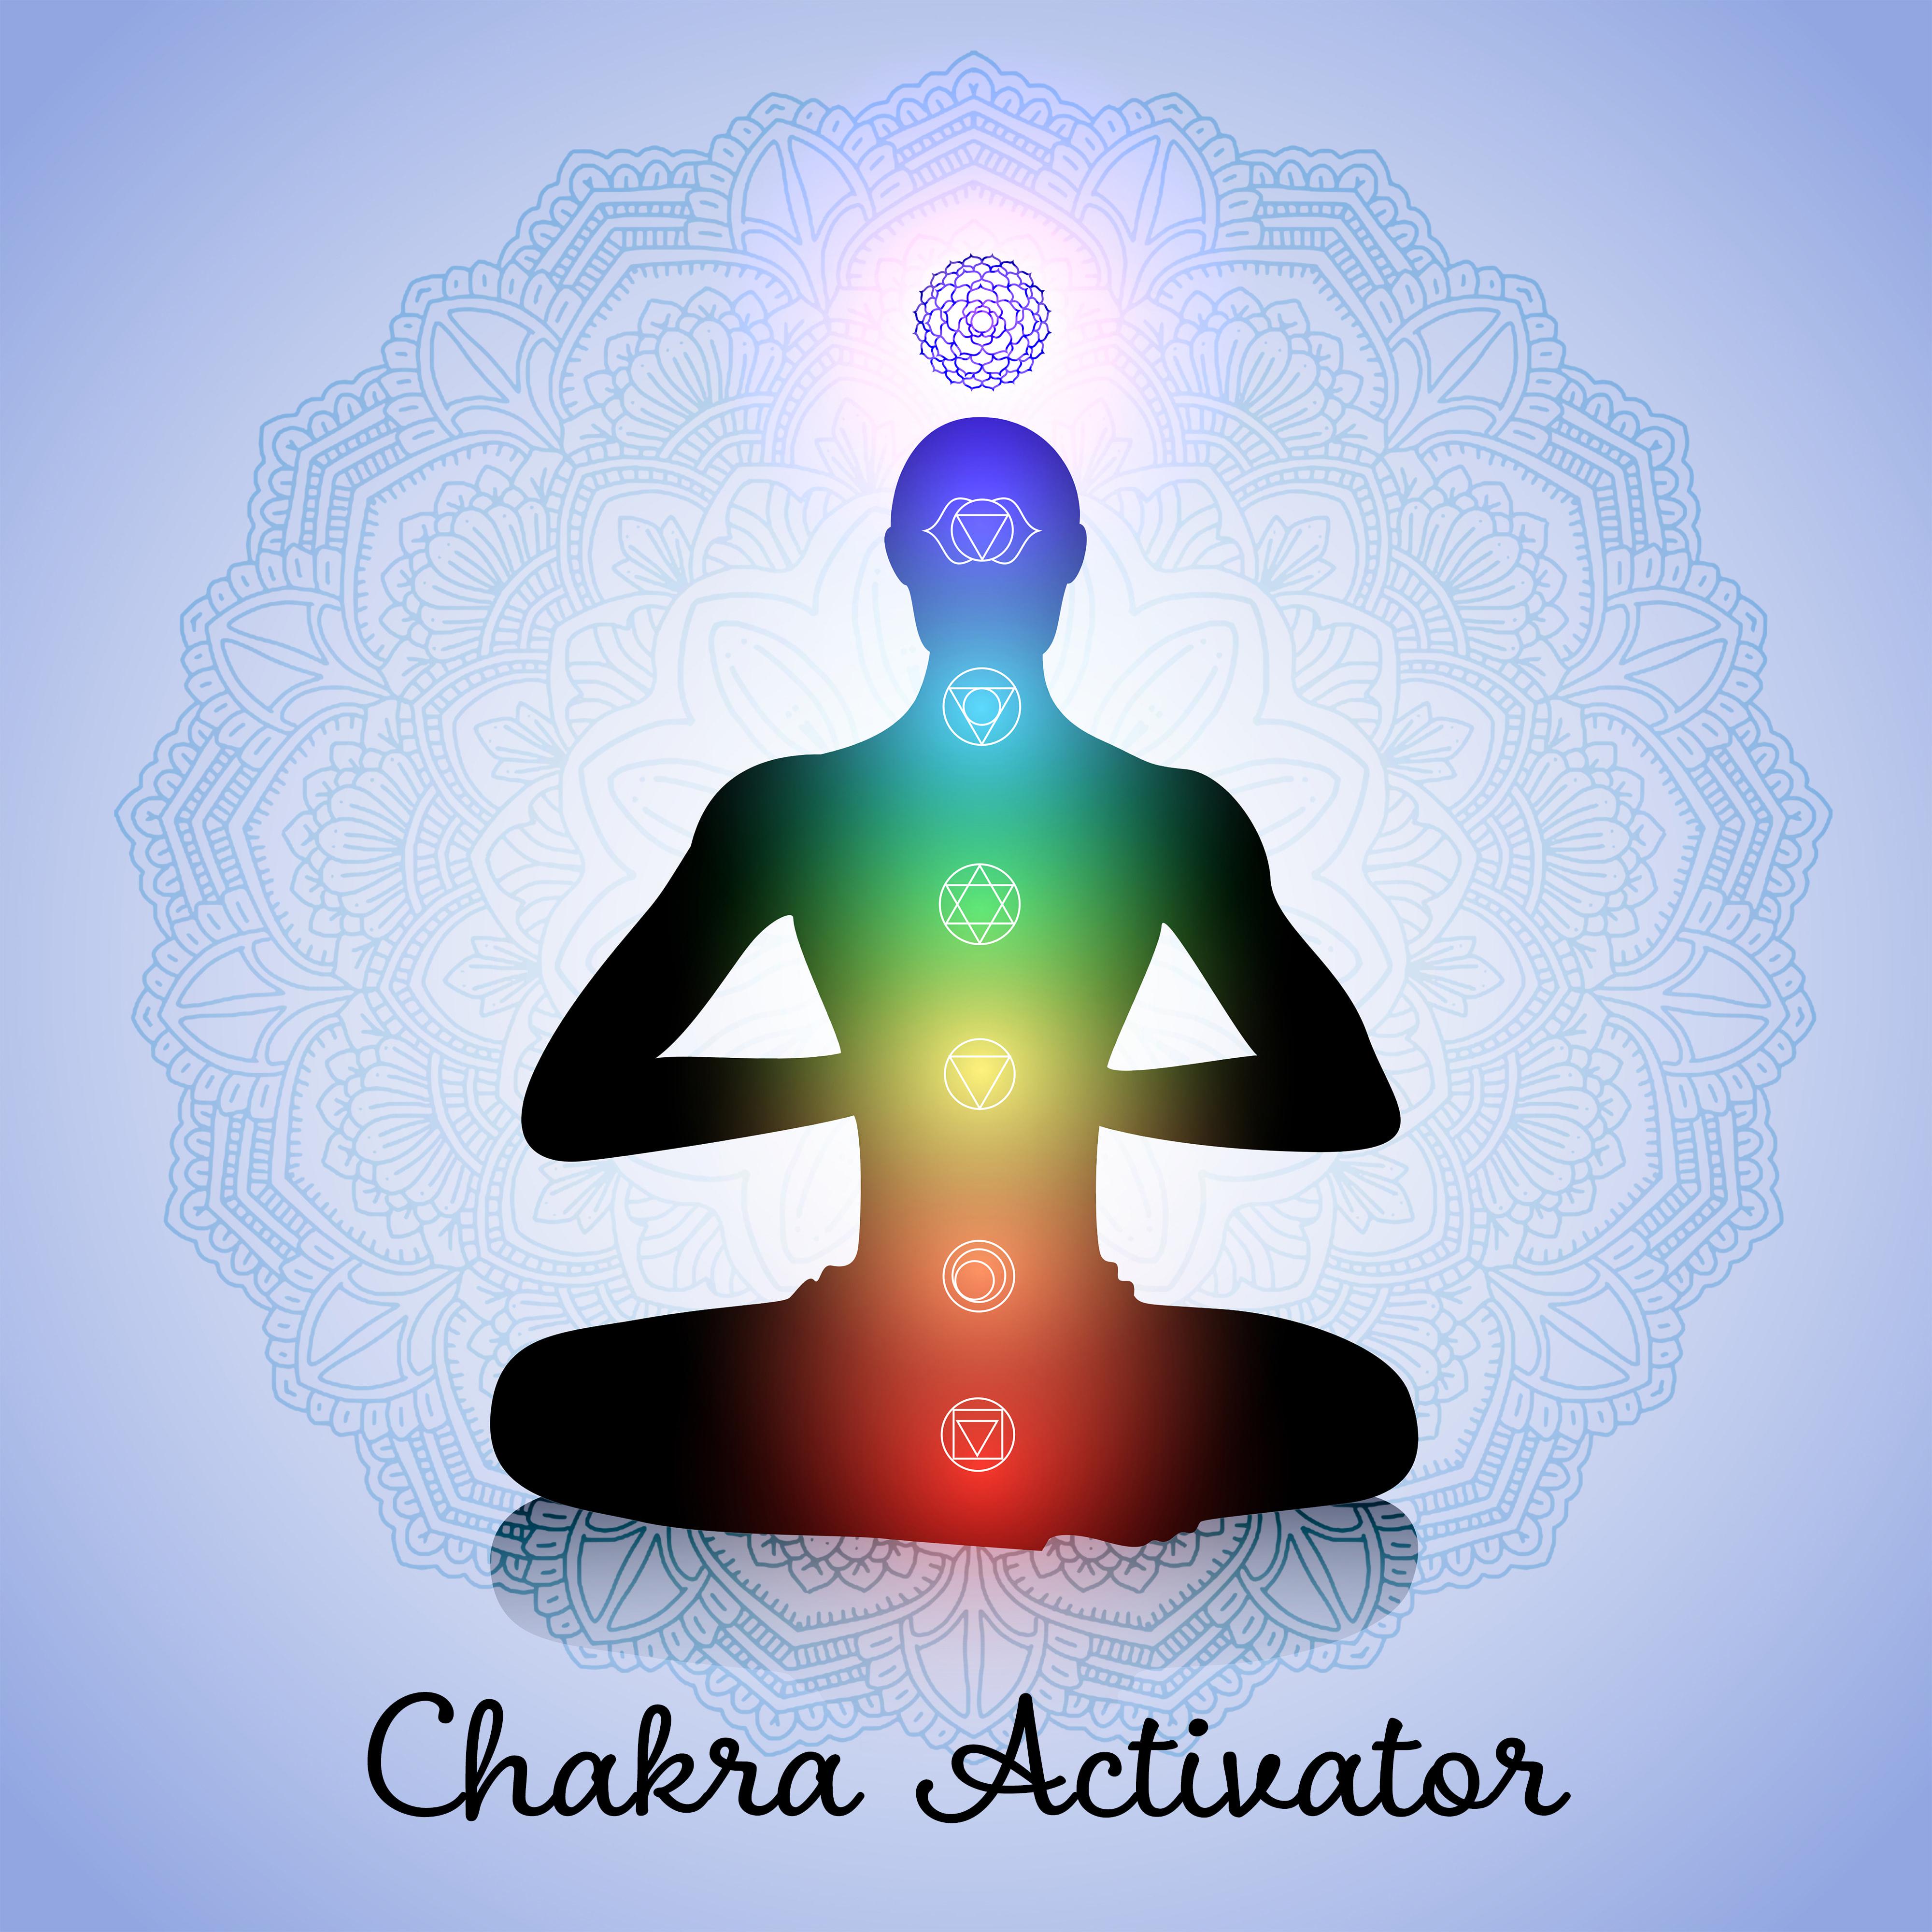 Chakra Activator: Meditative Music that Helps in the Opening, Cleansing and Unblocking of All Chakras and the Free Flow of Energy